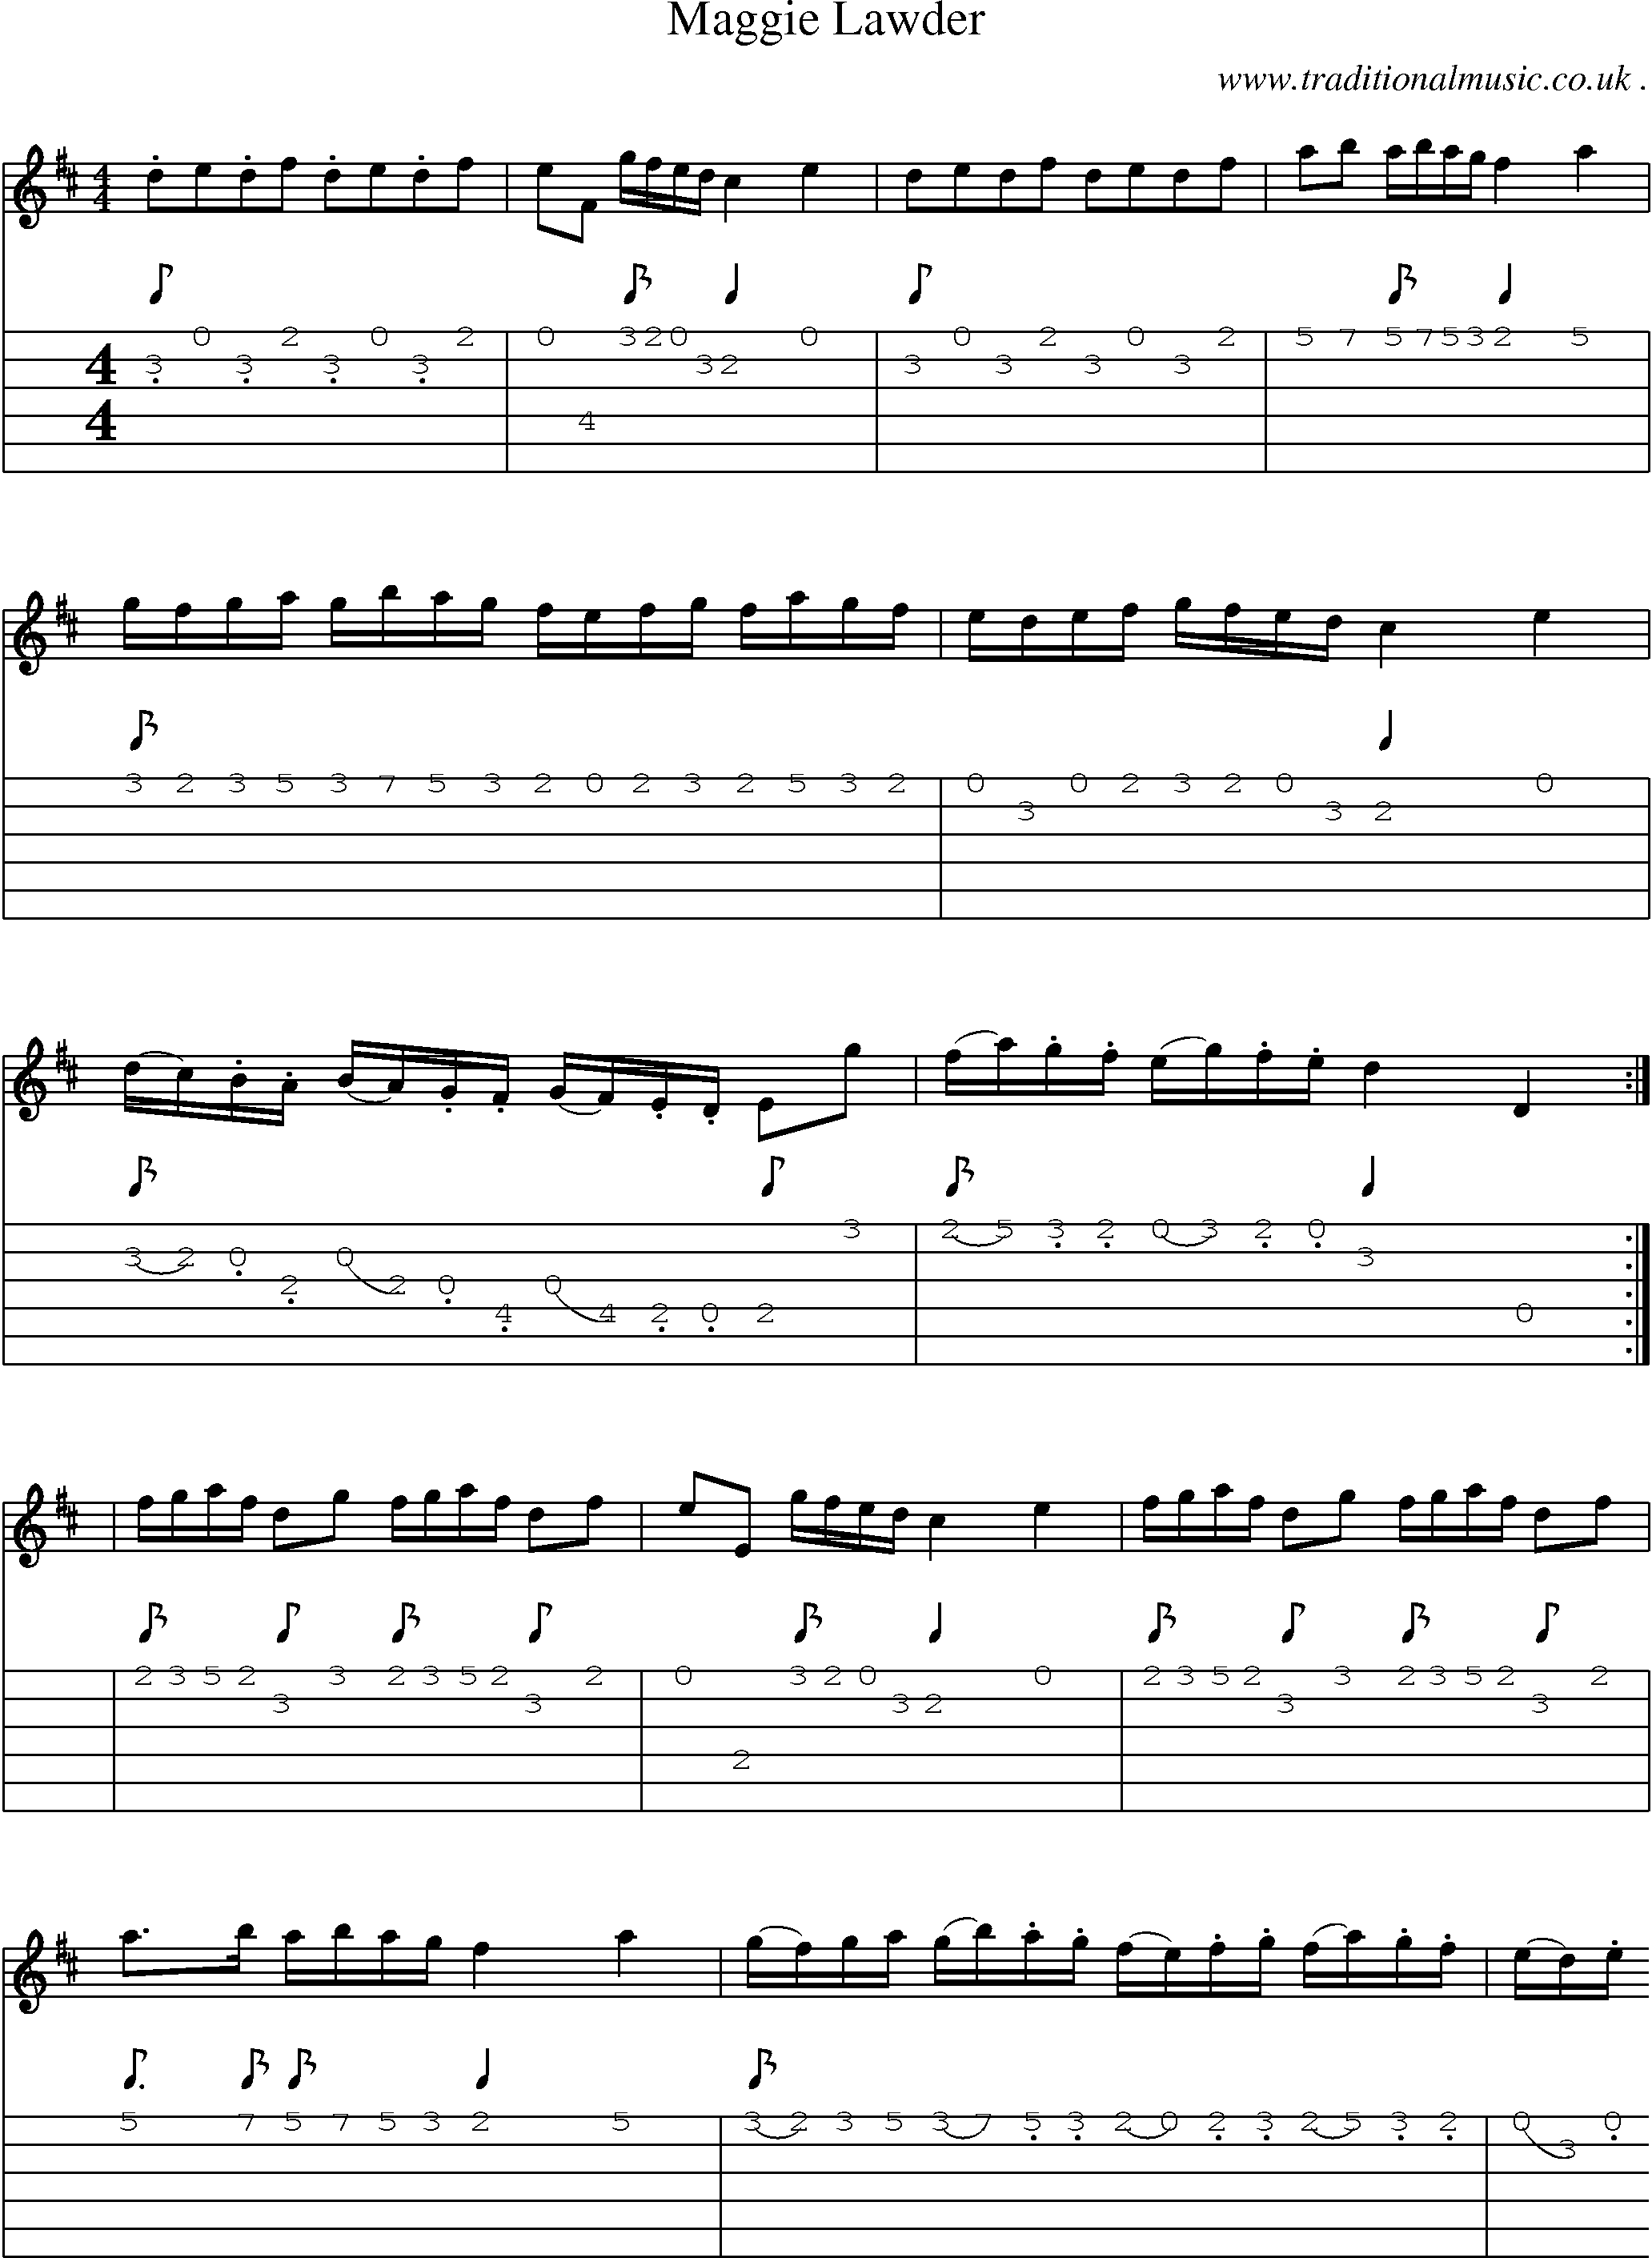 Sheet-Music and Guitar Tabs for Maggie Lawder